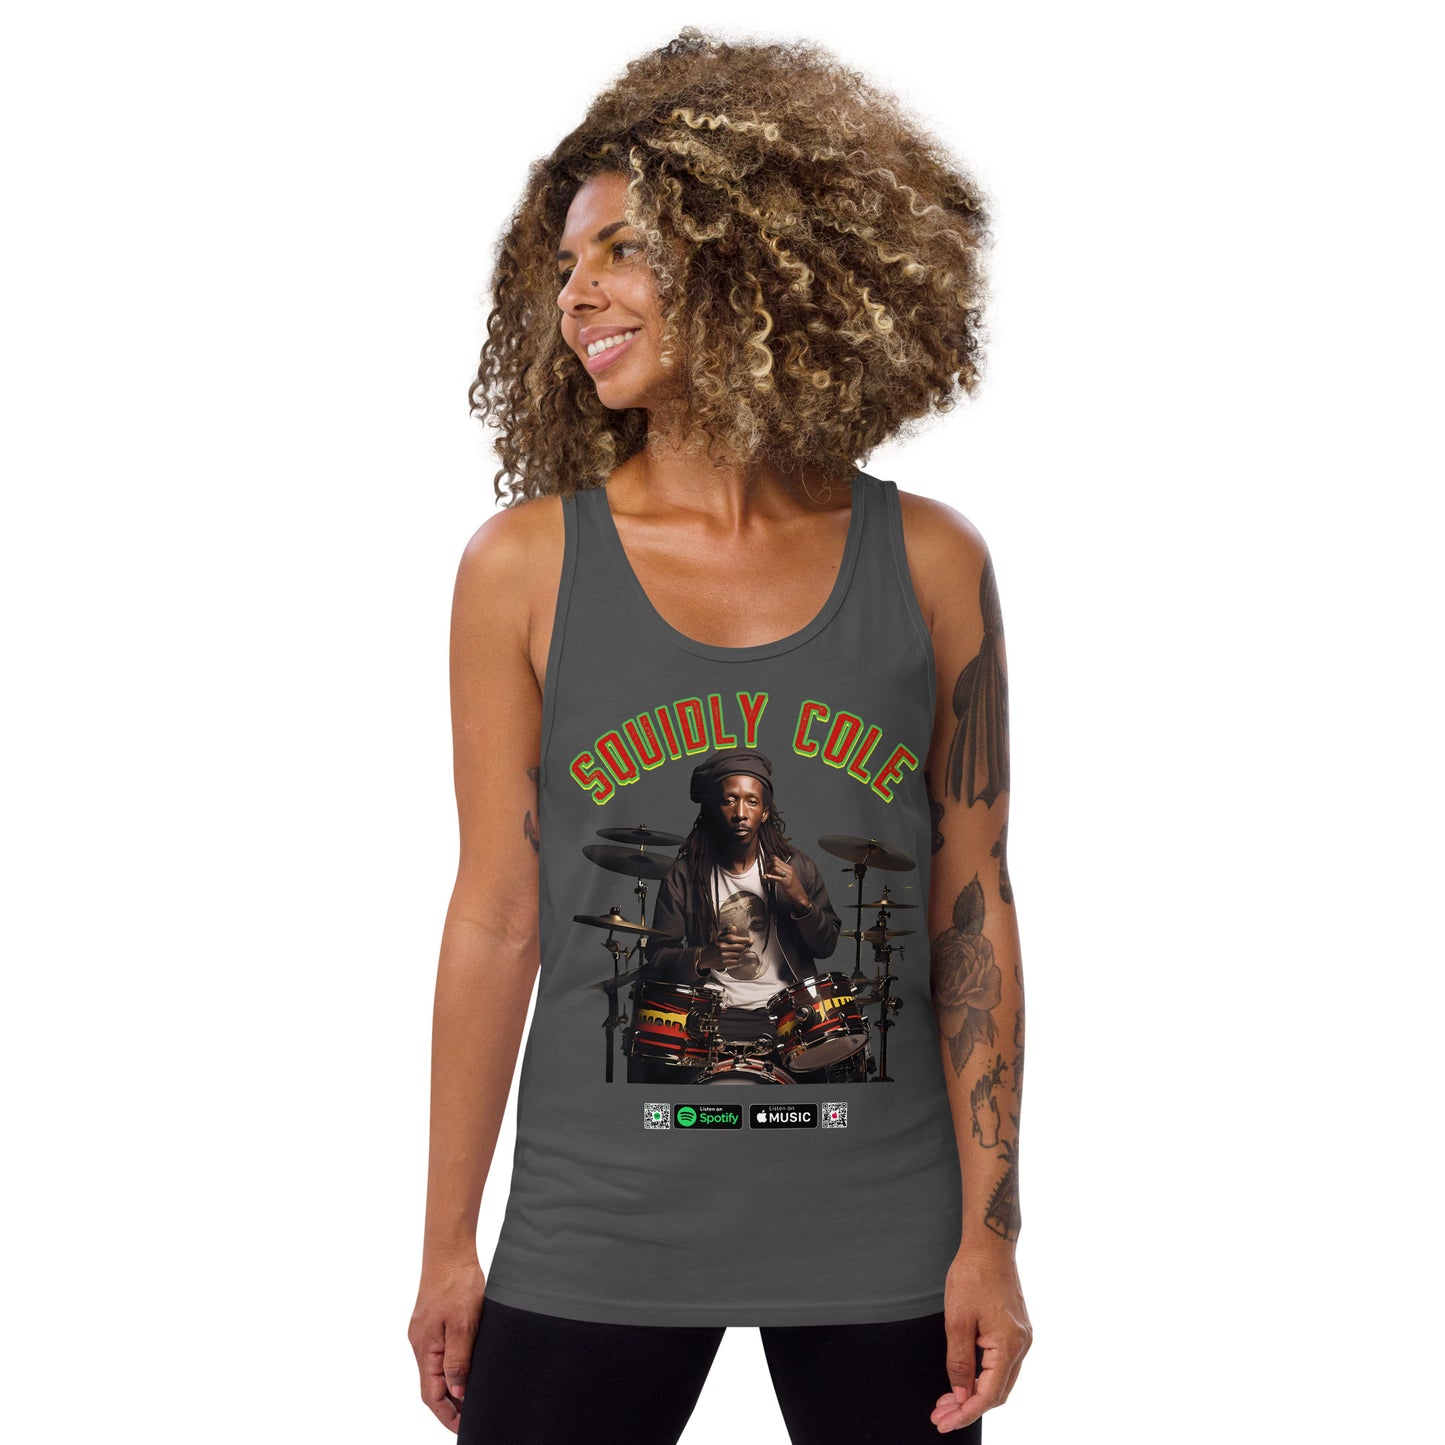 Squidly Cole's Reggae Drummer Tank: Dive into Music with Design #027. This tank top captures the essence of reggae beats. Feel the music, wear the style. Perfect for beach parties, concerts, and laid-back days. #SquidlyColeMusic #ReggaeRhythms #TankTopVibes